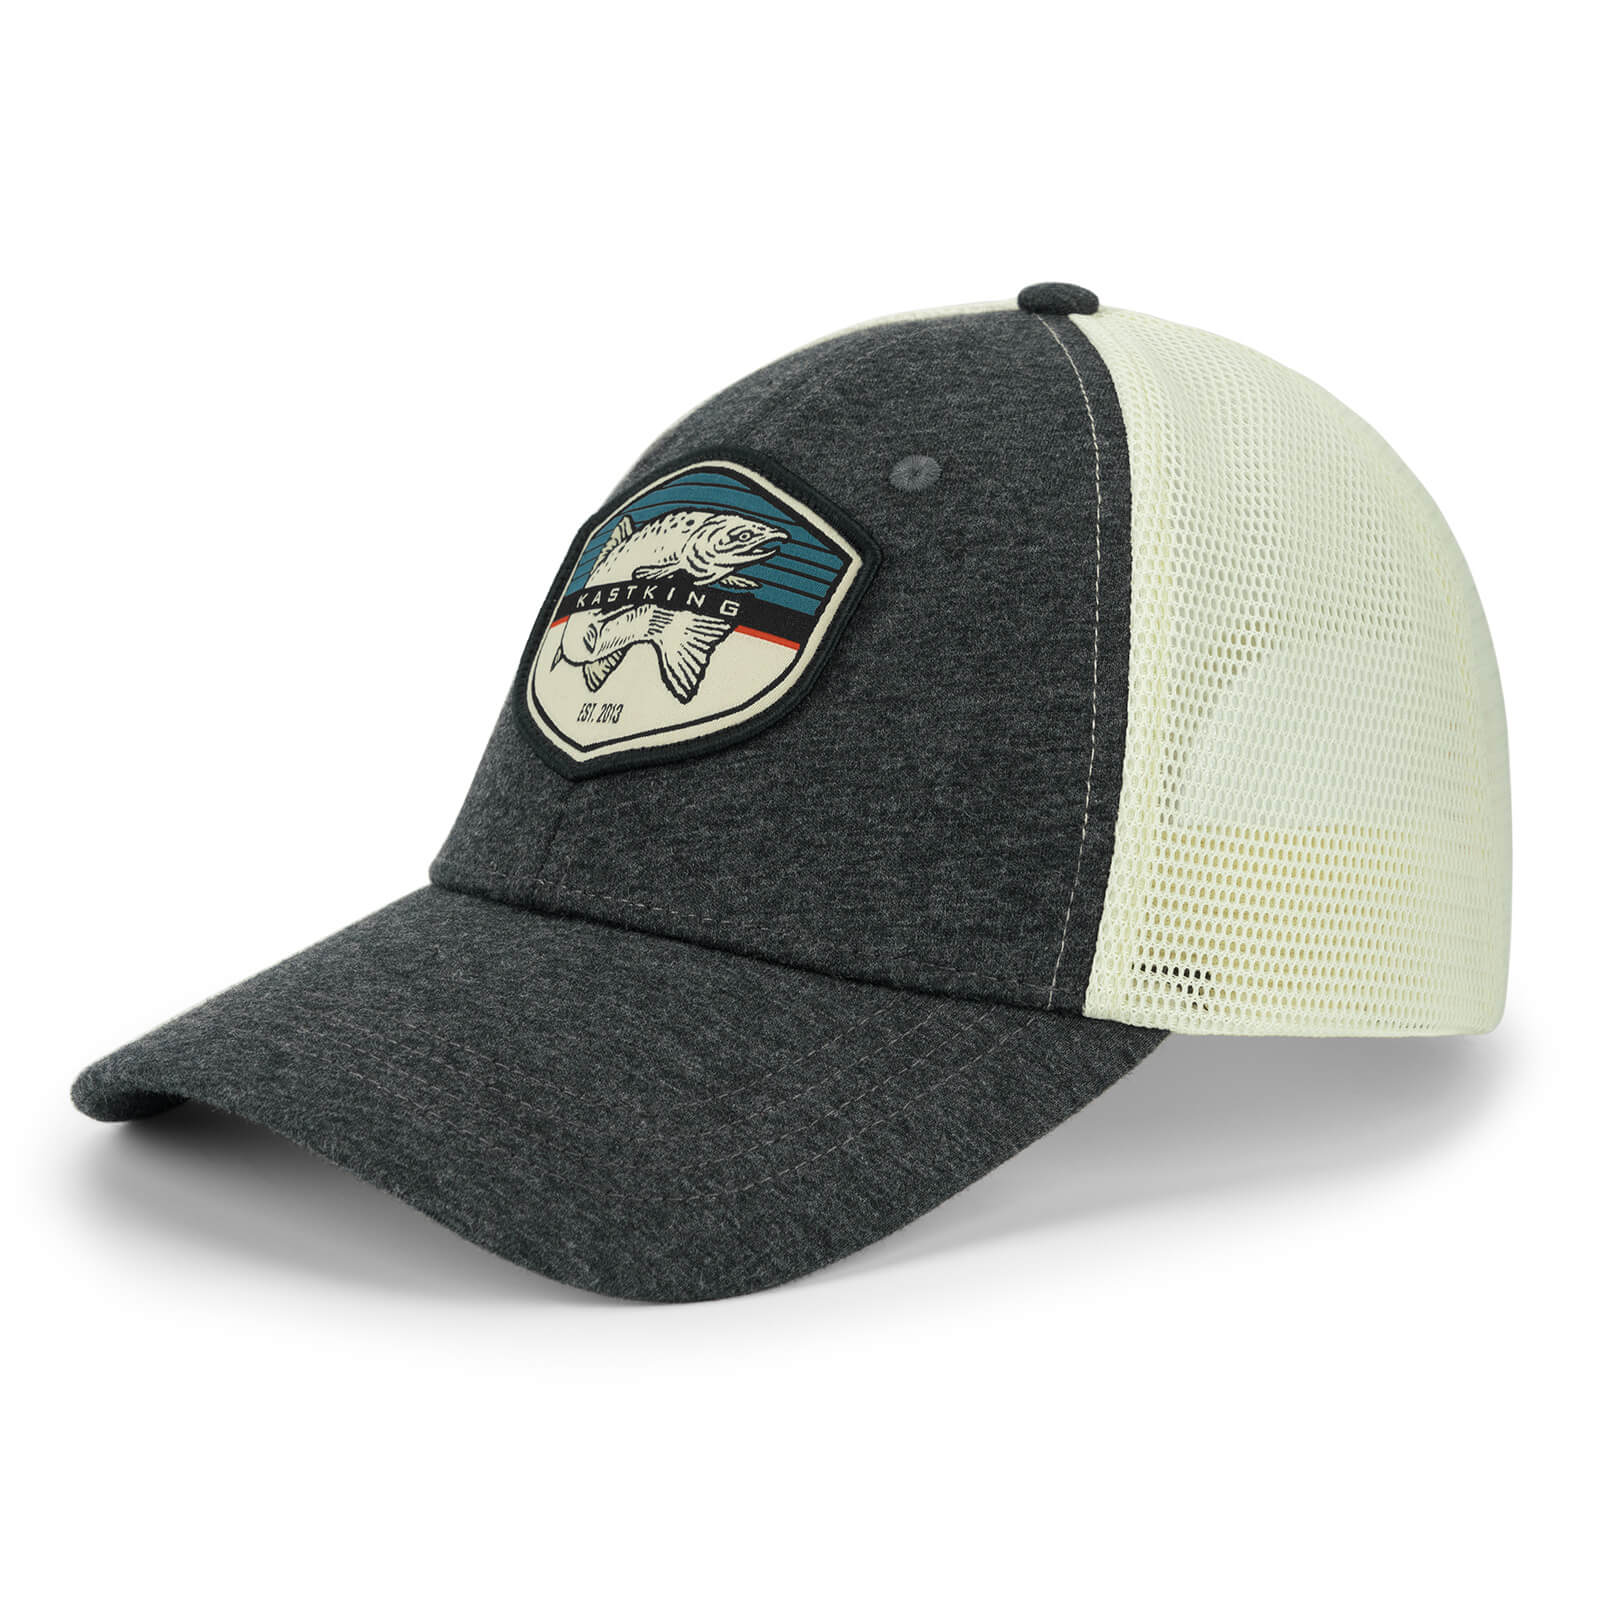 KastKing - Hats! We've got them!!! Check out the new